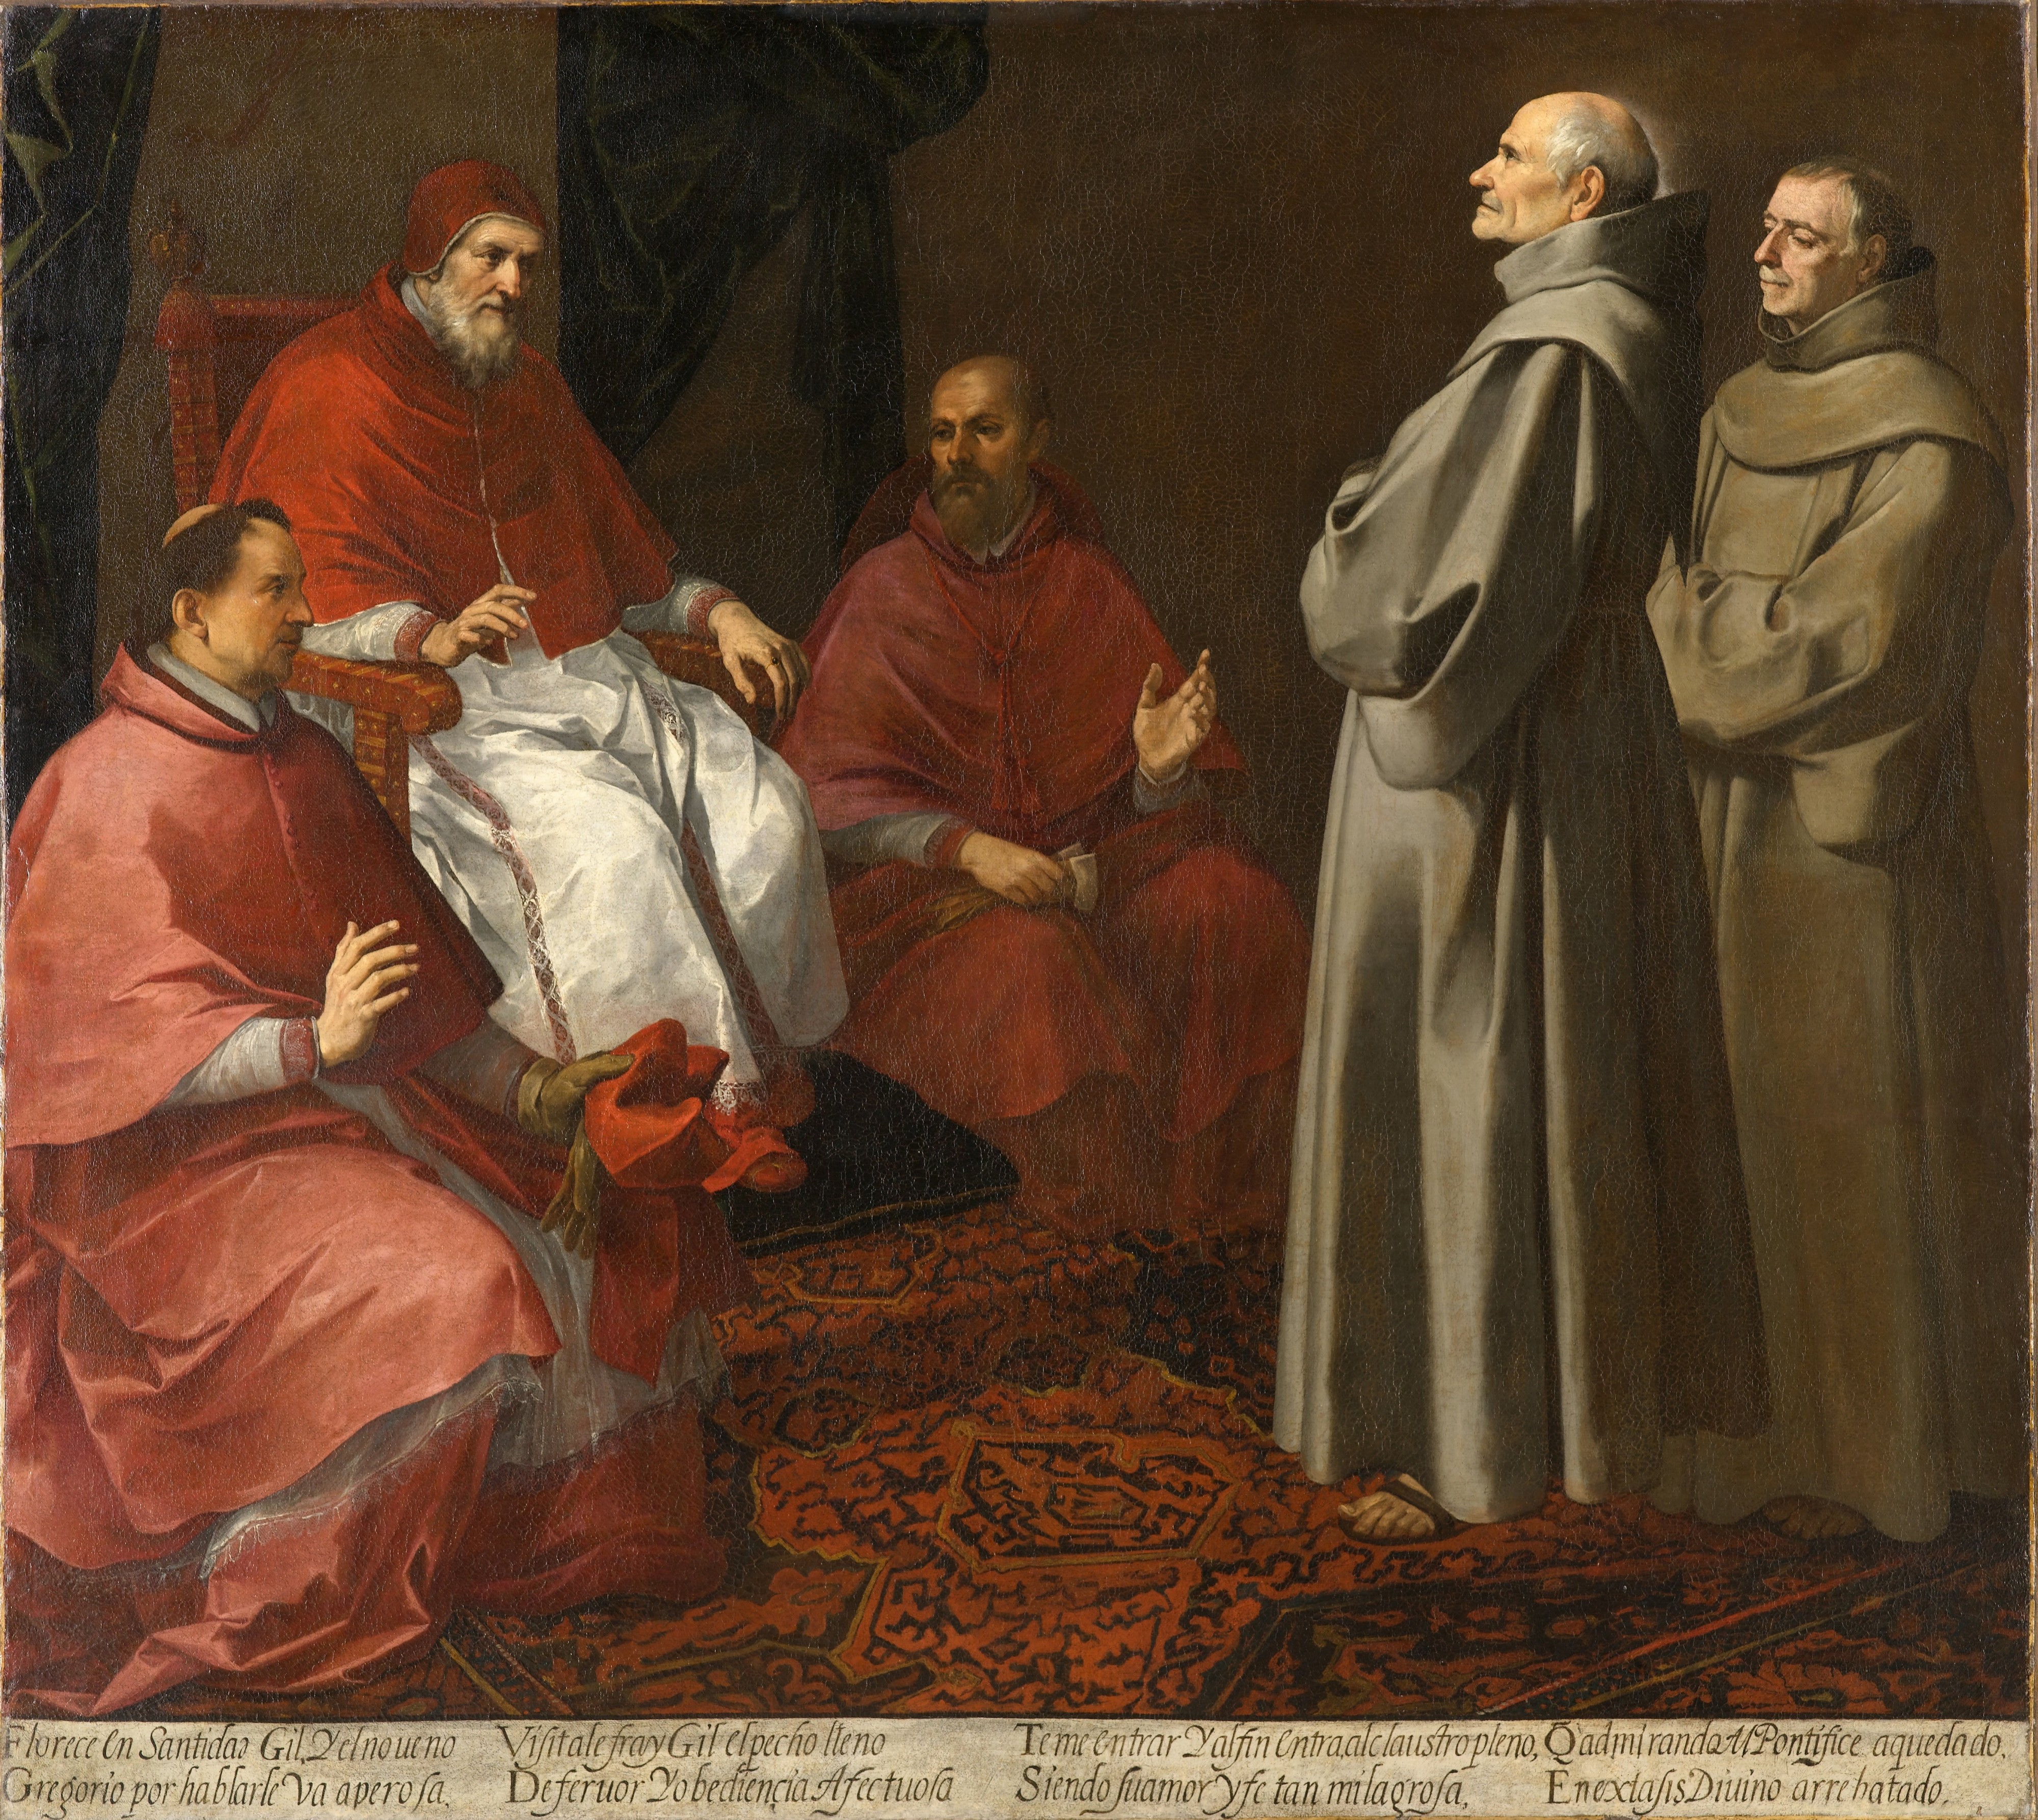 The Blessed Giles Before Pope Gregory IX - Bartolomé Estéban Murillo - Google Cultural Institute